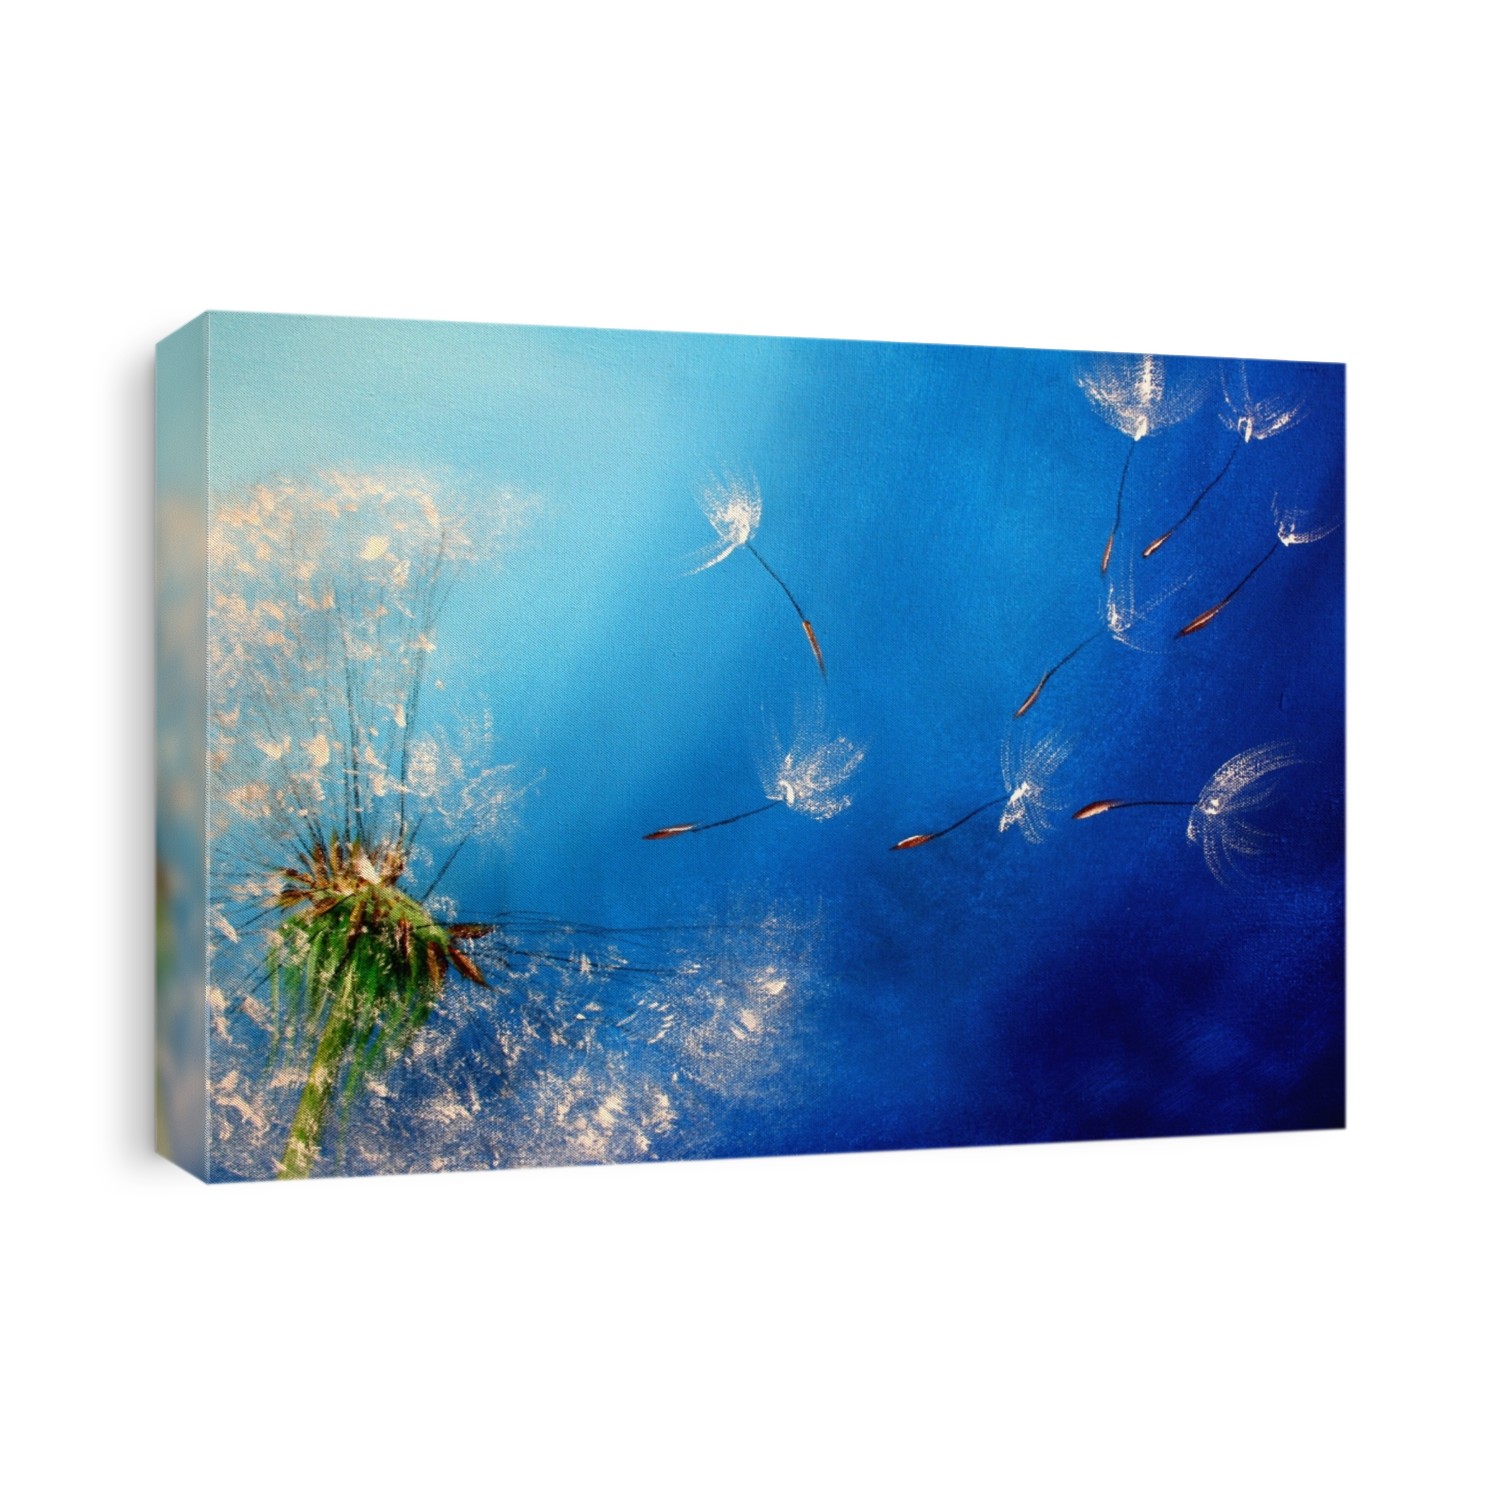 Acrylic painted scene with a single dandelion flower against blue background. Art created by photographer